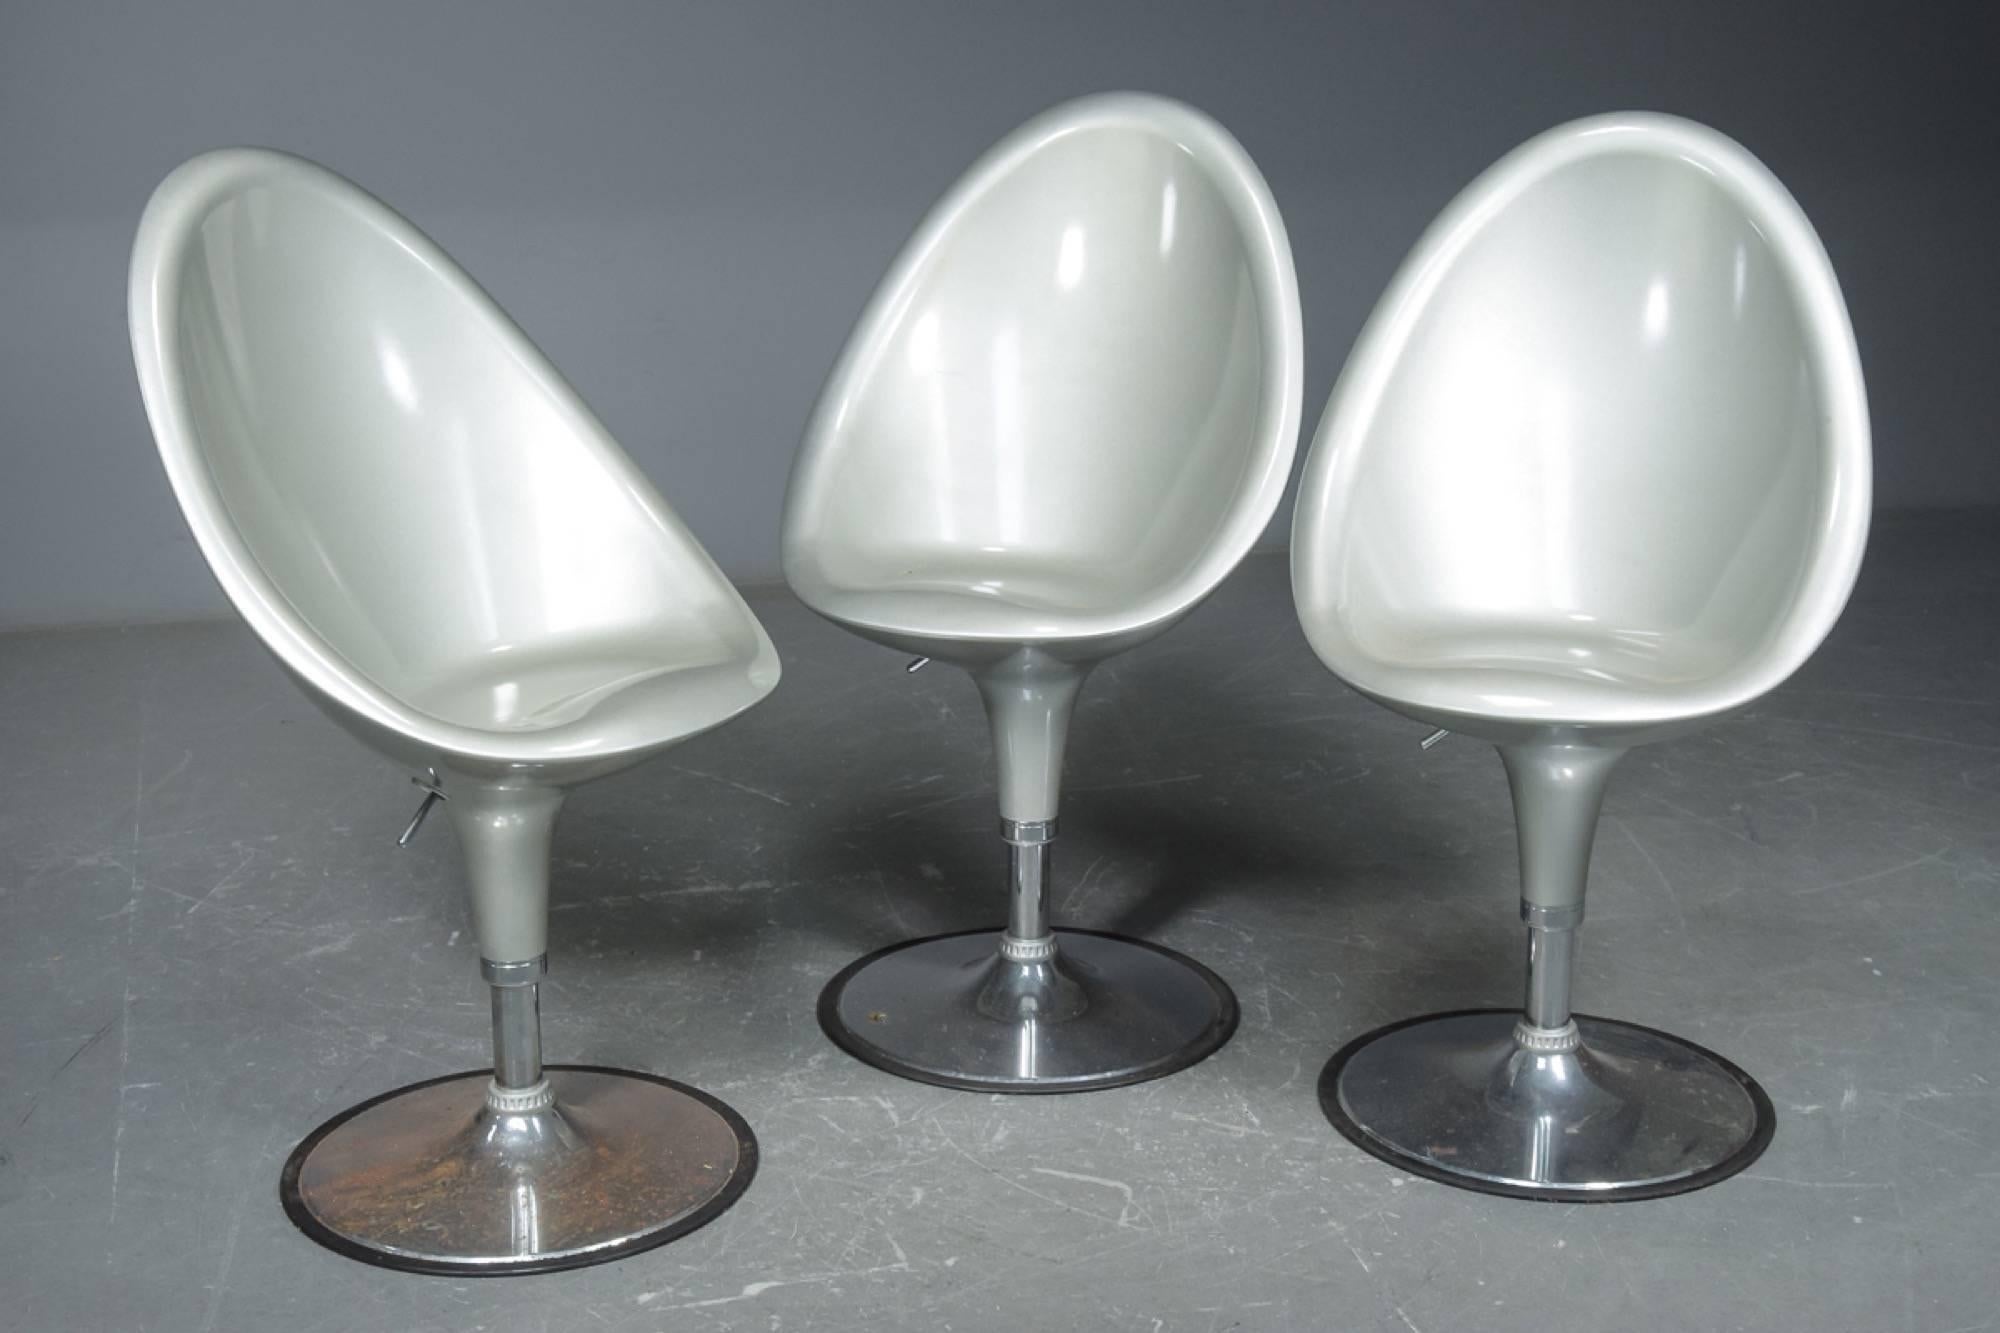 Set of three Postmodern barstools with fiberglass shells and chromed tulip style bases. Seat height is adjustable.